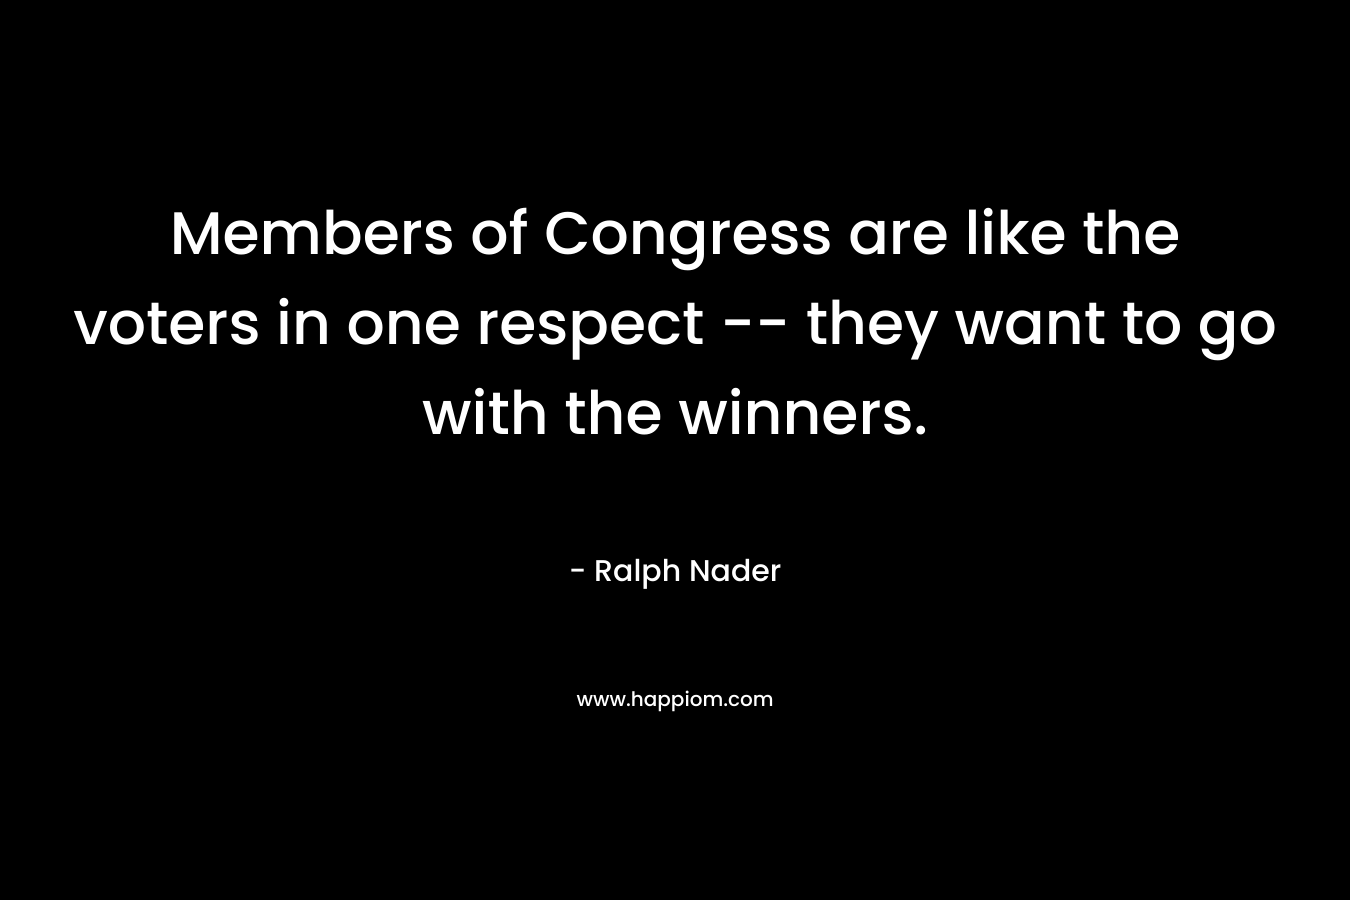 Members of Congress are like the voters in one respect — they want to go with the winners. – Ralph Nader